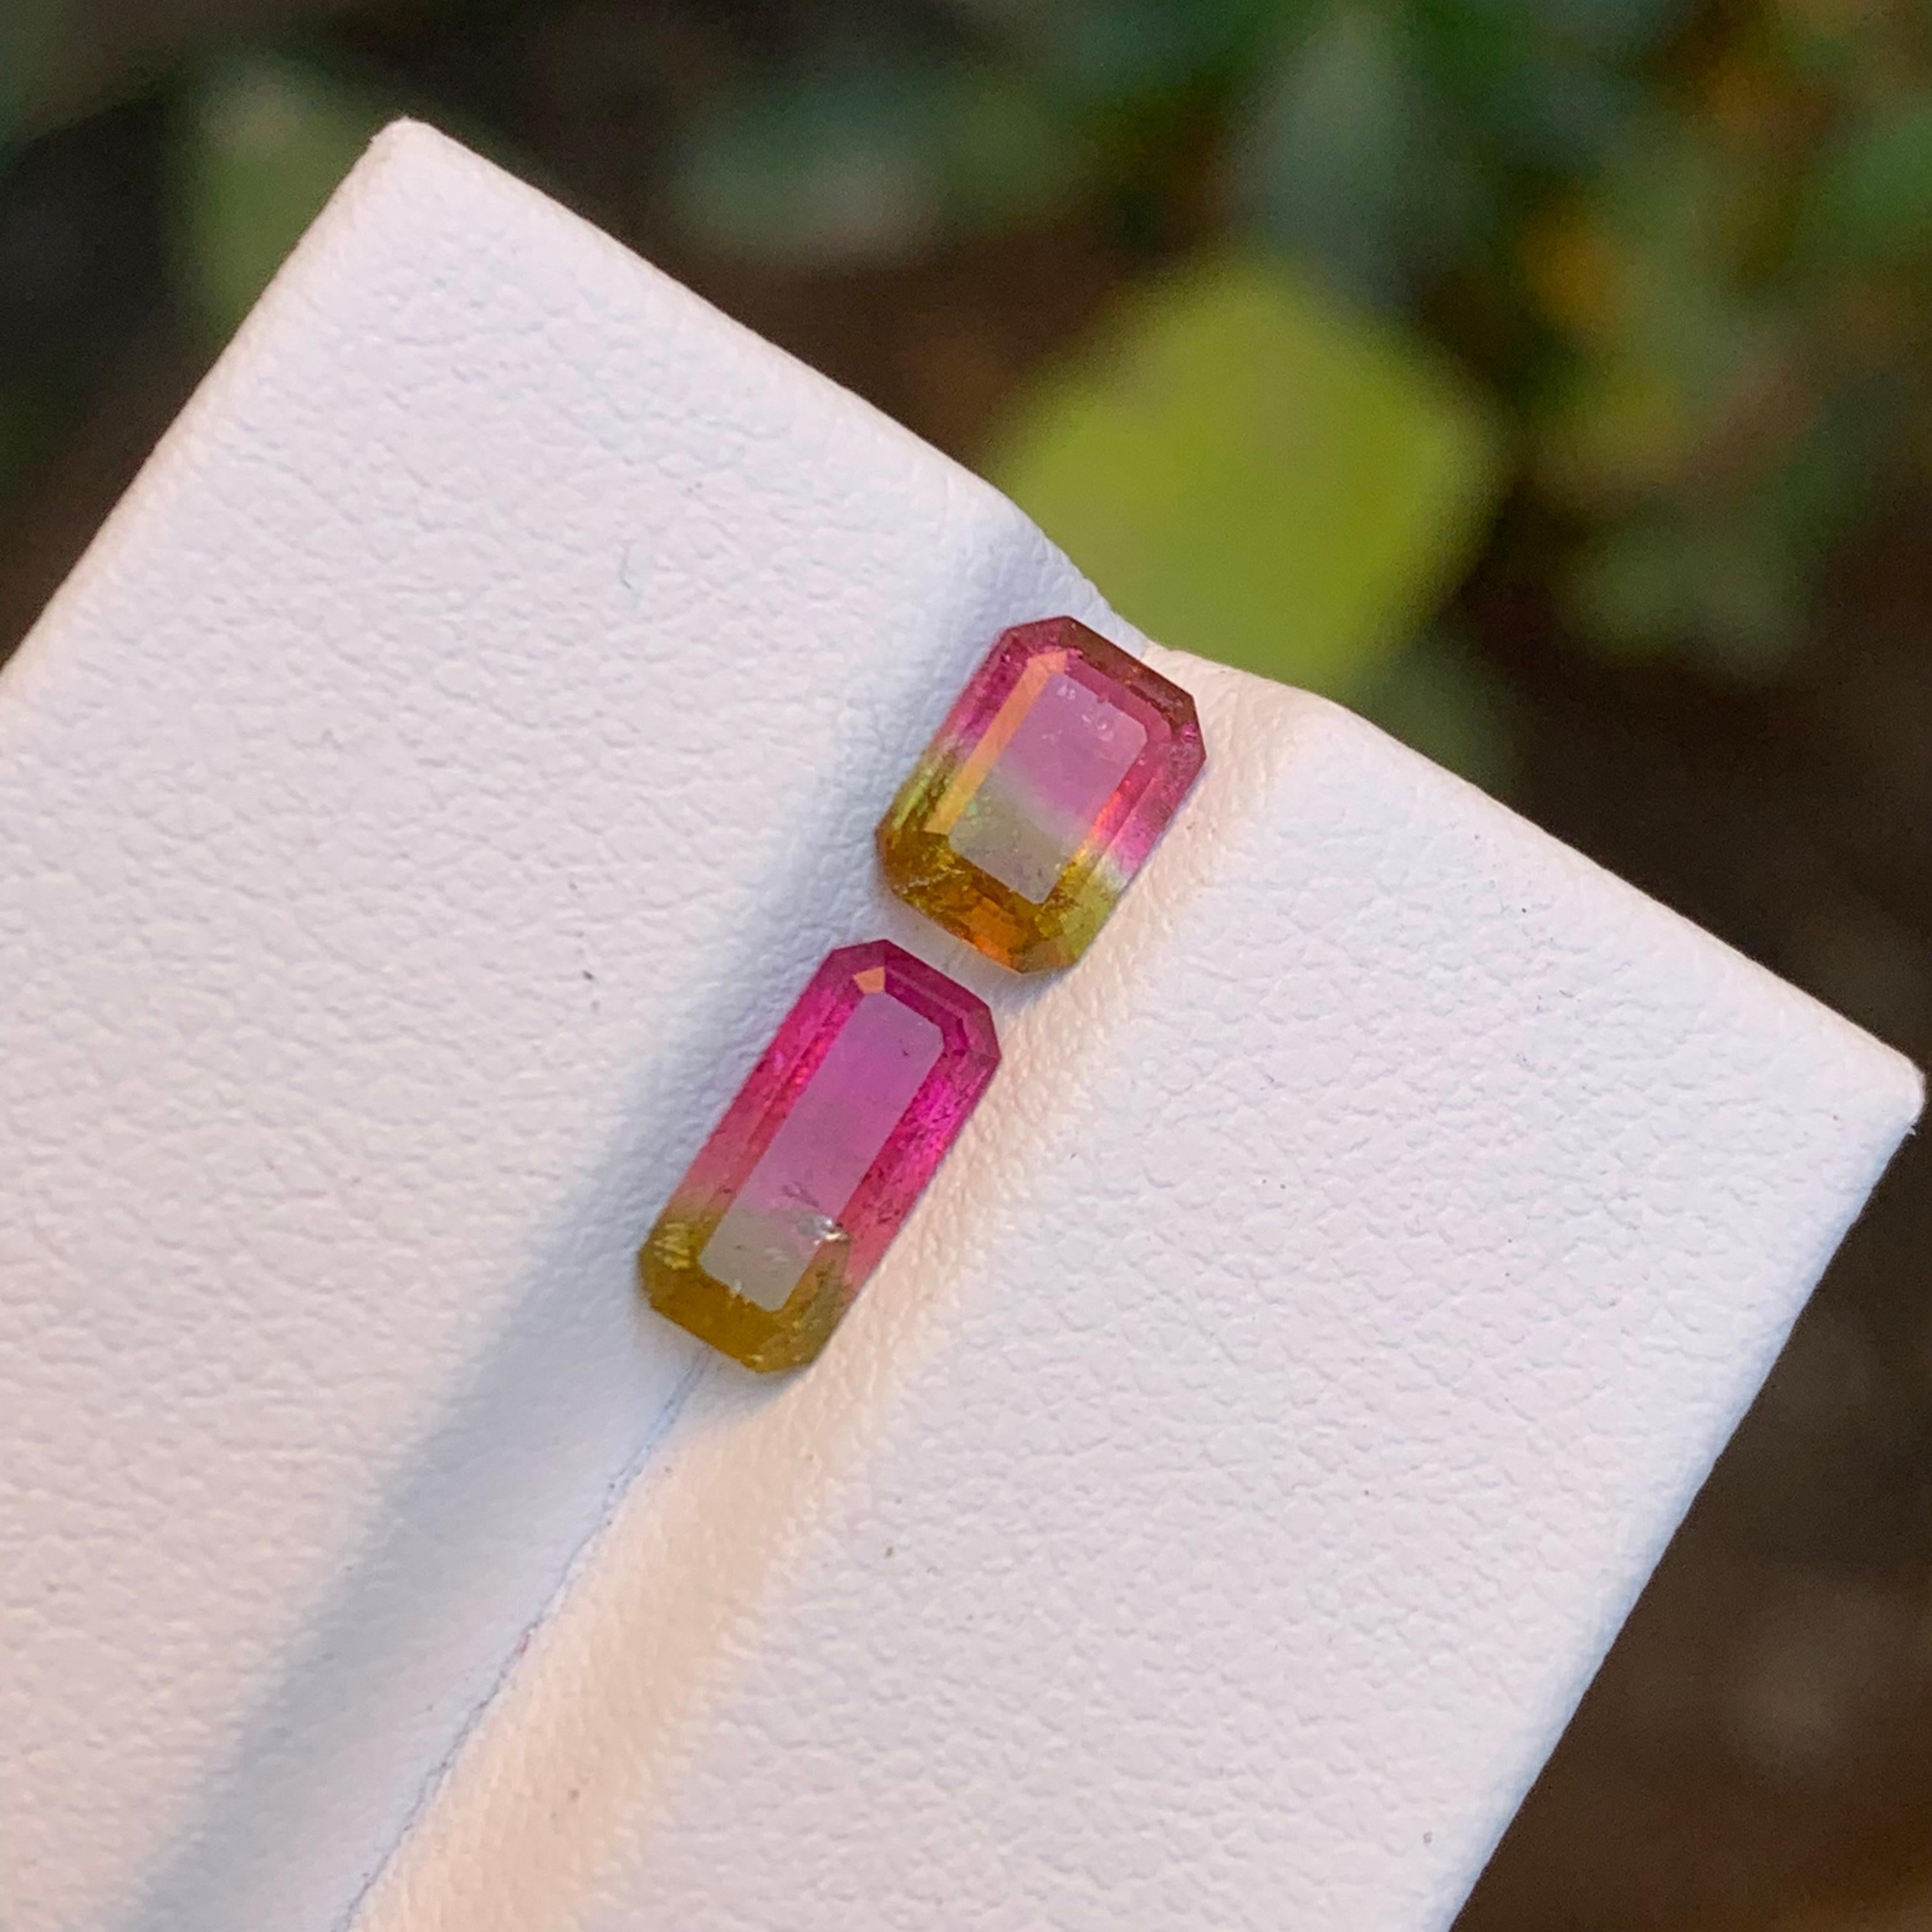 Gemstone Type: Tourmaline
Weight: 1.55 Carats
Dimensions: 
0.65 Ct: 6.62 x 4.75 x 2.69
0.90 Ct: 8.59 x 4.00 x 2.77
Color: Watermelon Bicolor (Green and Pink)
Clarity: Slightly Included
Treatment: Heated
Origin: Afghanistan
Certificate: On demand